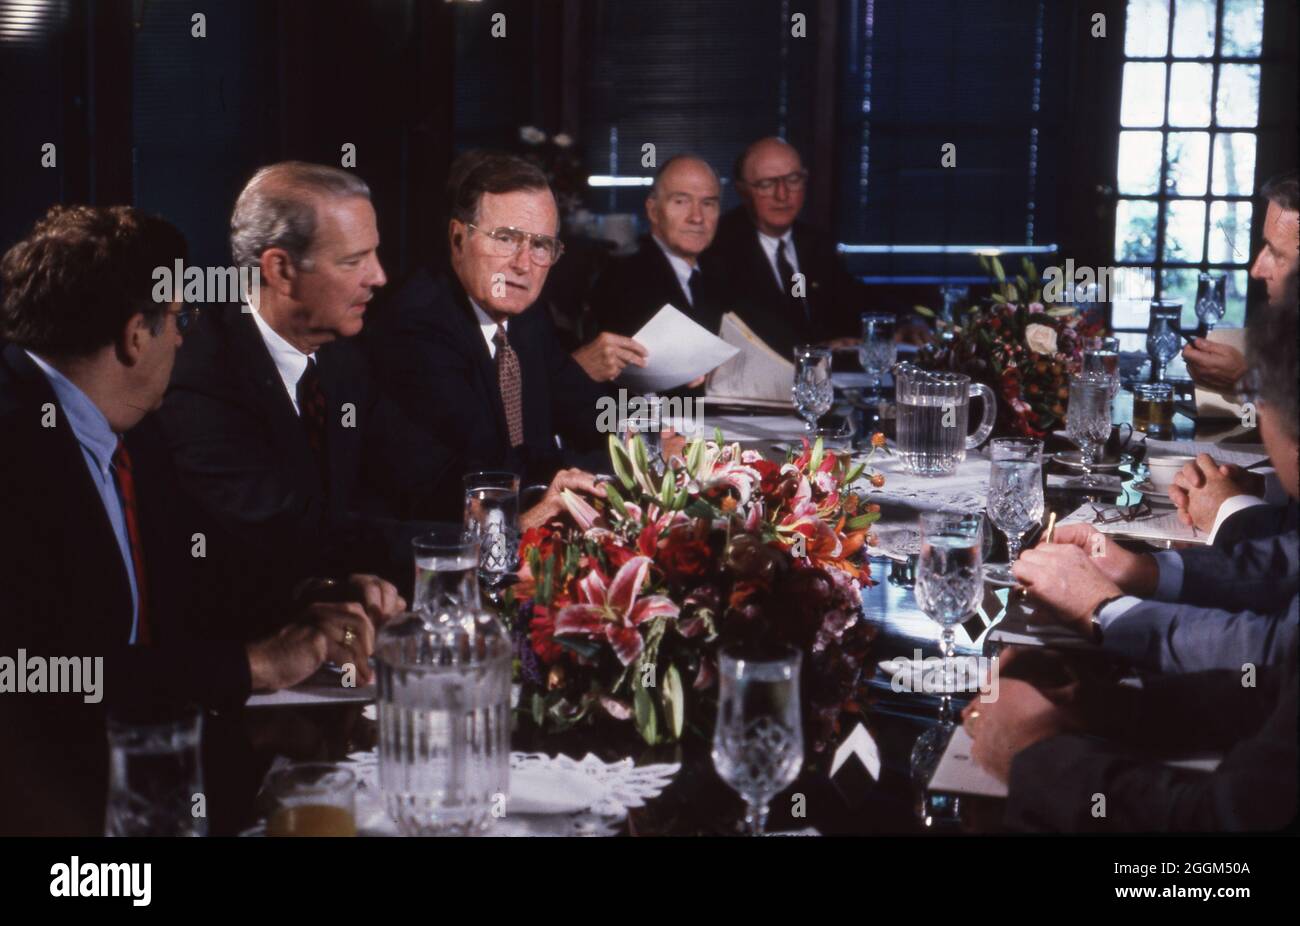 Houston Texas USA, July 1990: Dinner at the Houston Economic Summit of Industrialized Nations at the Convention Center and Rice University. U.S. President George H. W. Bush, center left wearing glasses, plays host to other world leaders. ©Bob Daemmrich Stock Photo